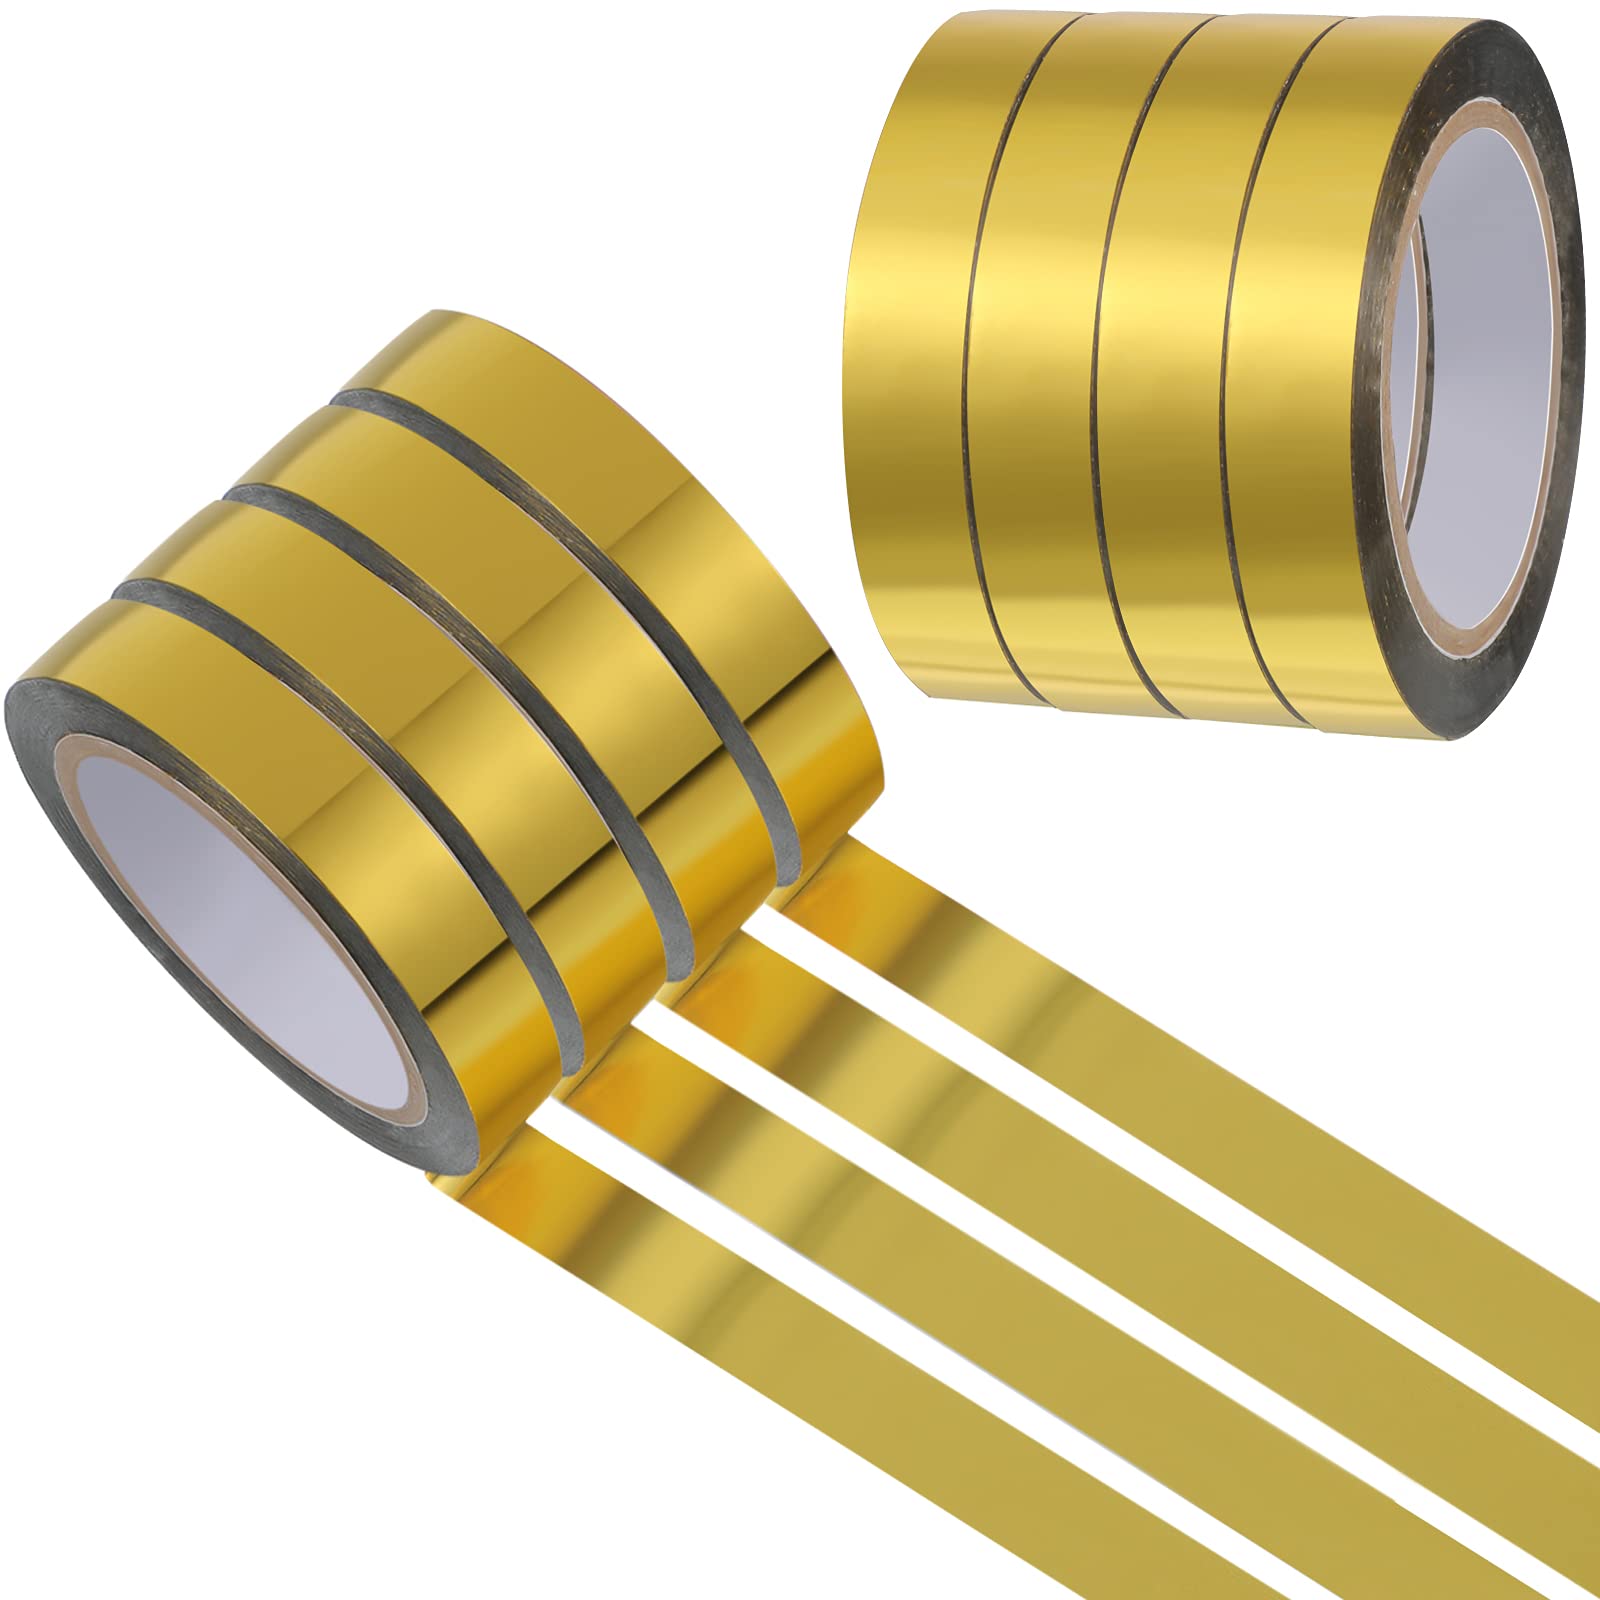  Aster 4 Pieces Metallic Mirror Tape DIY Art Graphic Tape for  Gift Wrapping Crafts Decoration, 3/8 Inch x 88 Yards (Gold) : Arts, Crafts  & Sewing